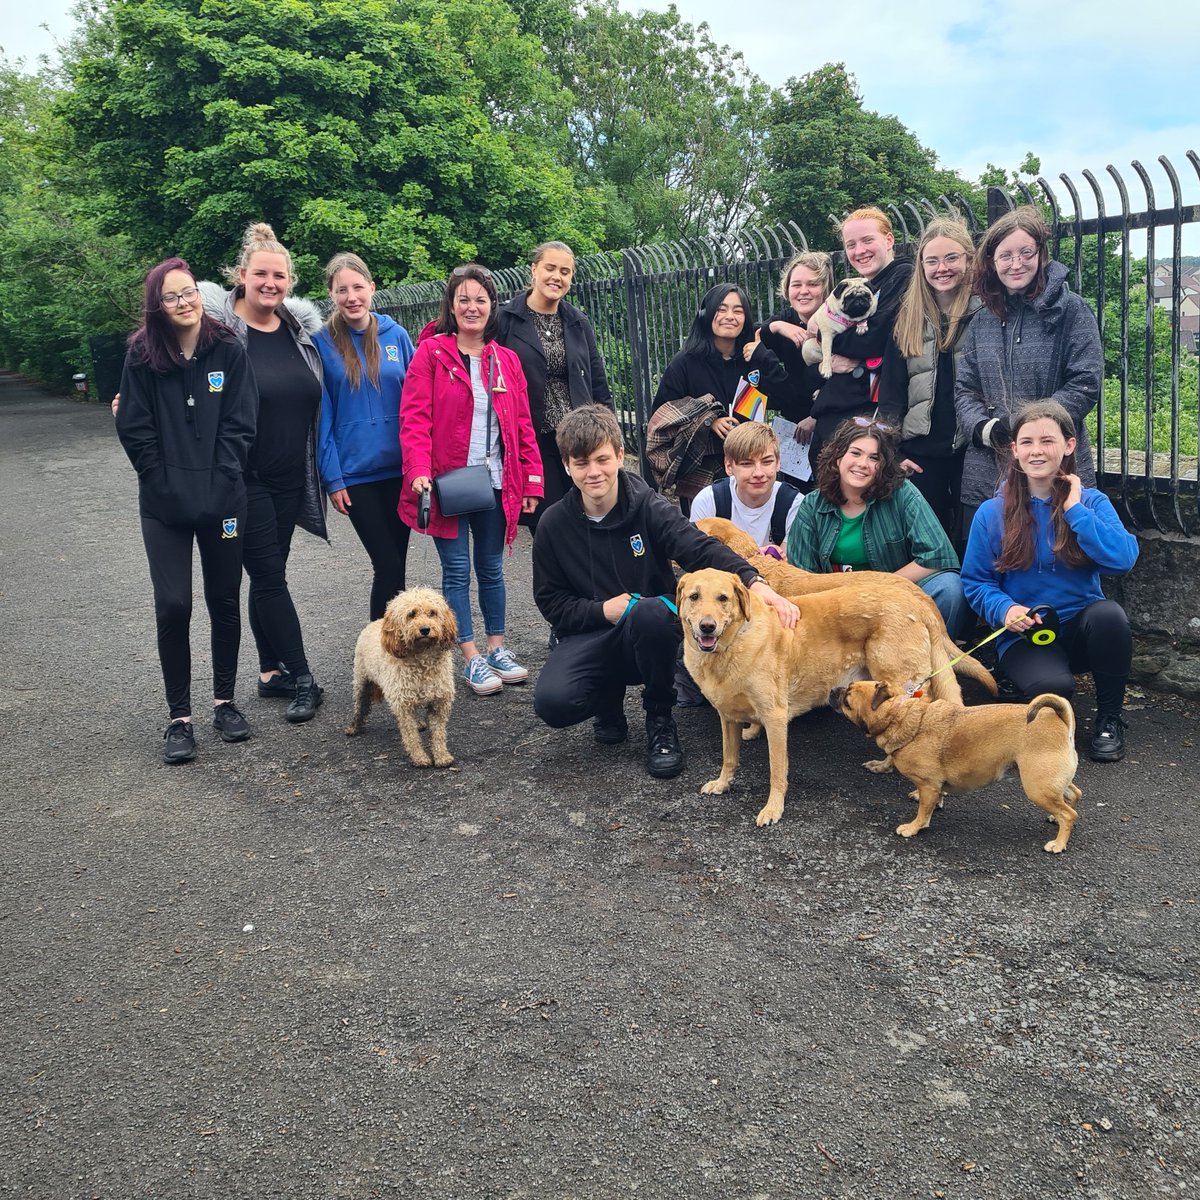 McFurry Wellbeing Walk. A lovely way to celebrate the start of the summer holidays. Nice conversation and ice cream. Perfect mix. @MonifiethHigh @AndrewDingwall @MonifiethHWB